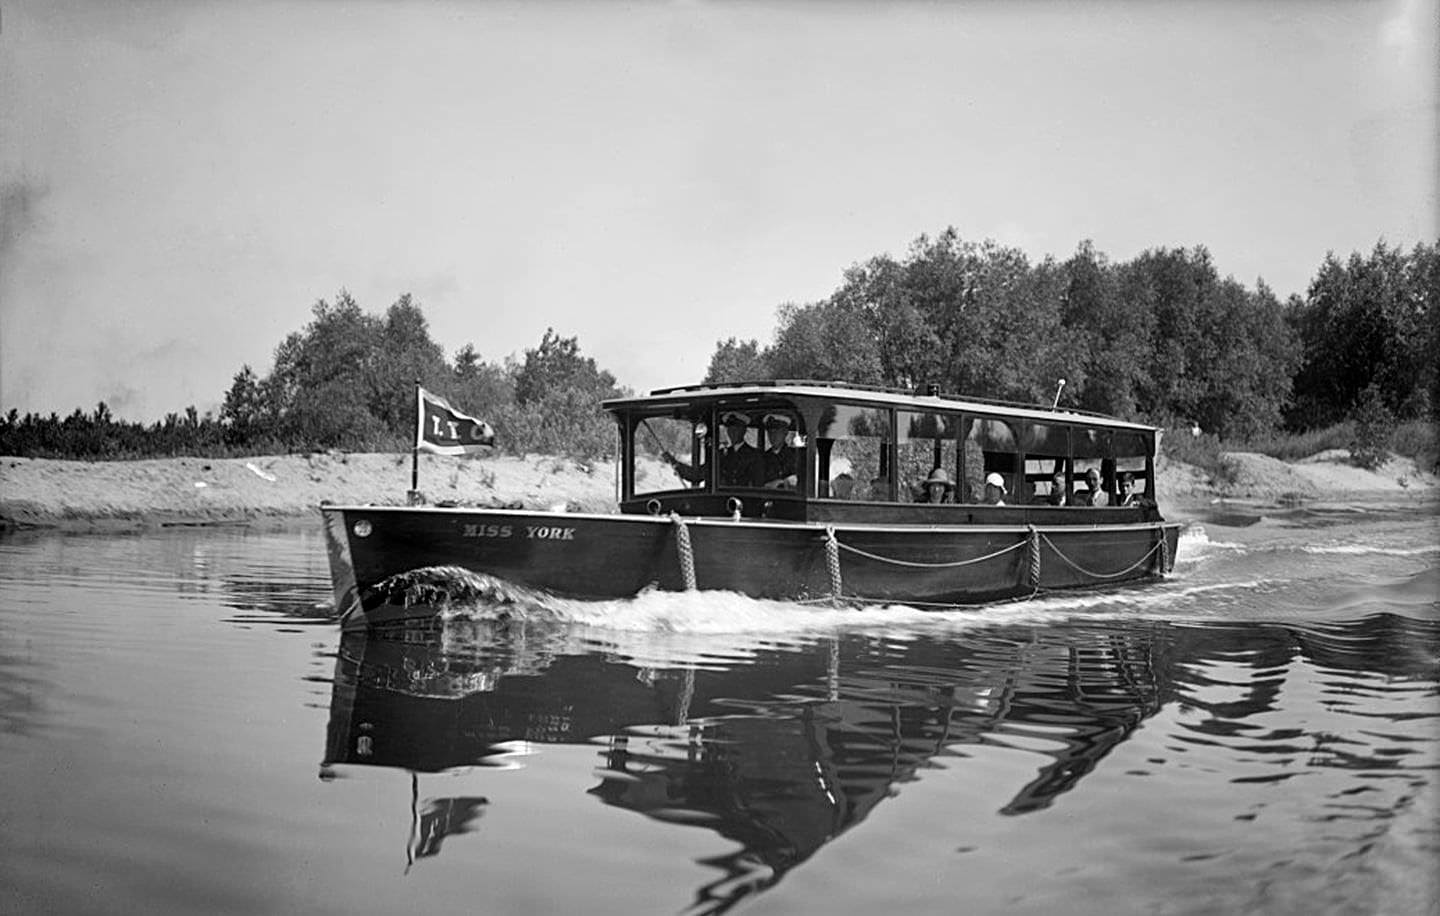 The 'Miss York' motor launch plying its way around the Toronto Islands during a tour, July 29, 1929.